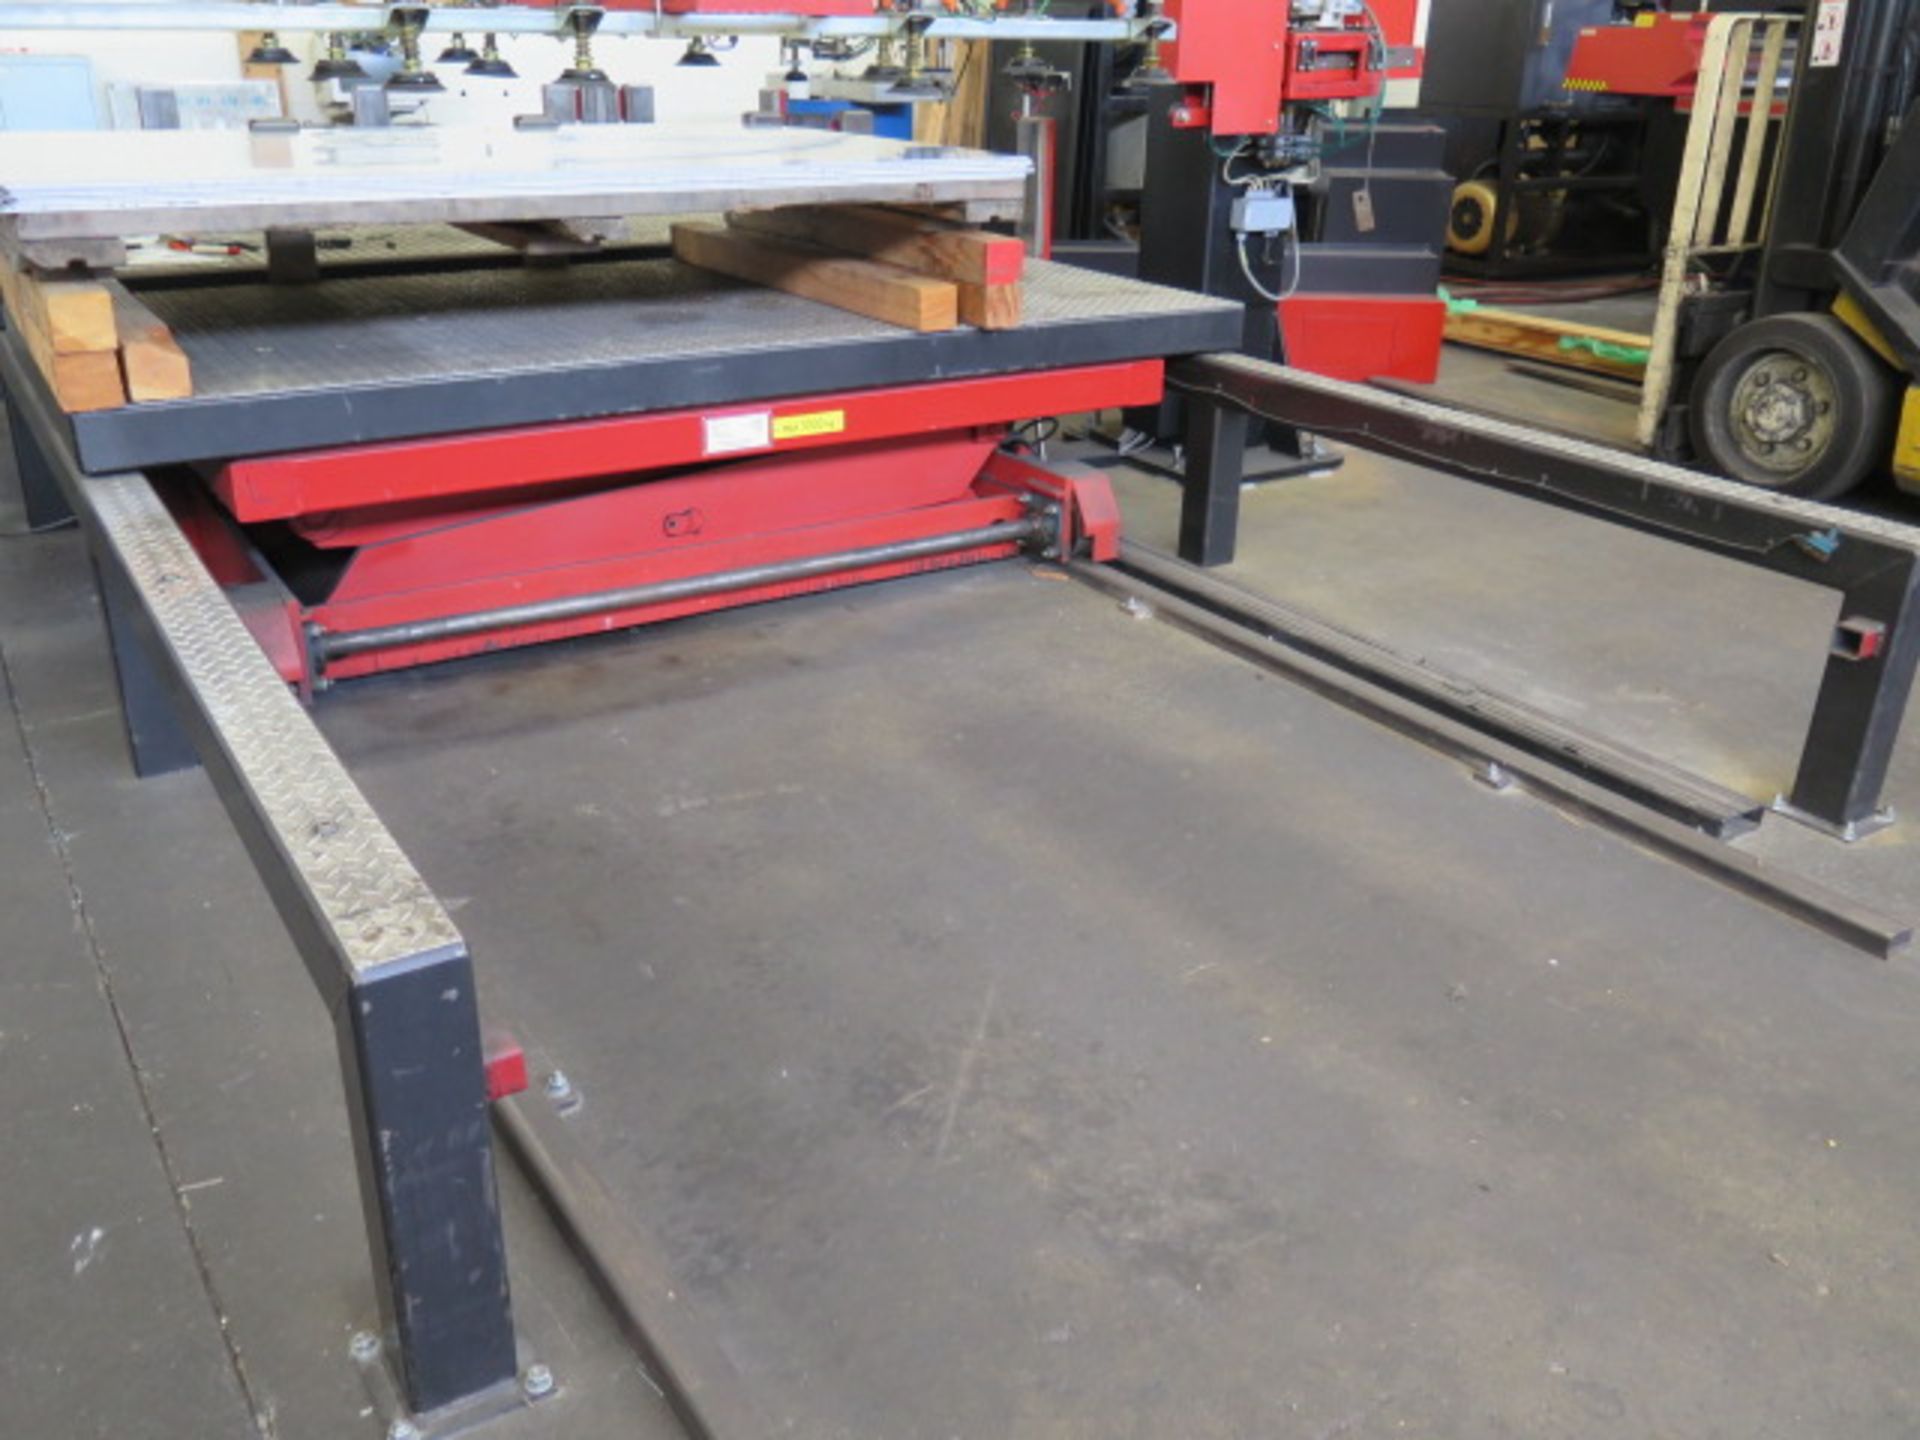 Amada VIPROS 357 30-Ton CNC Turret Punch Cell s/n 35710664 w/ 04P-C Controls, 58-Station, SOLD AS IS - Image 26 of 37